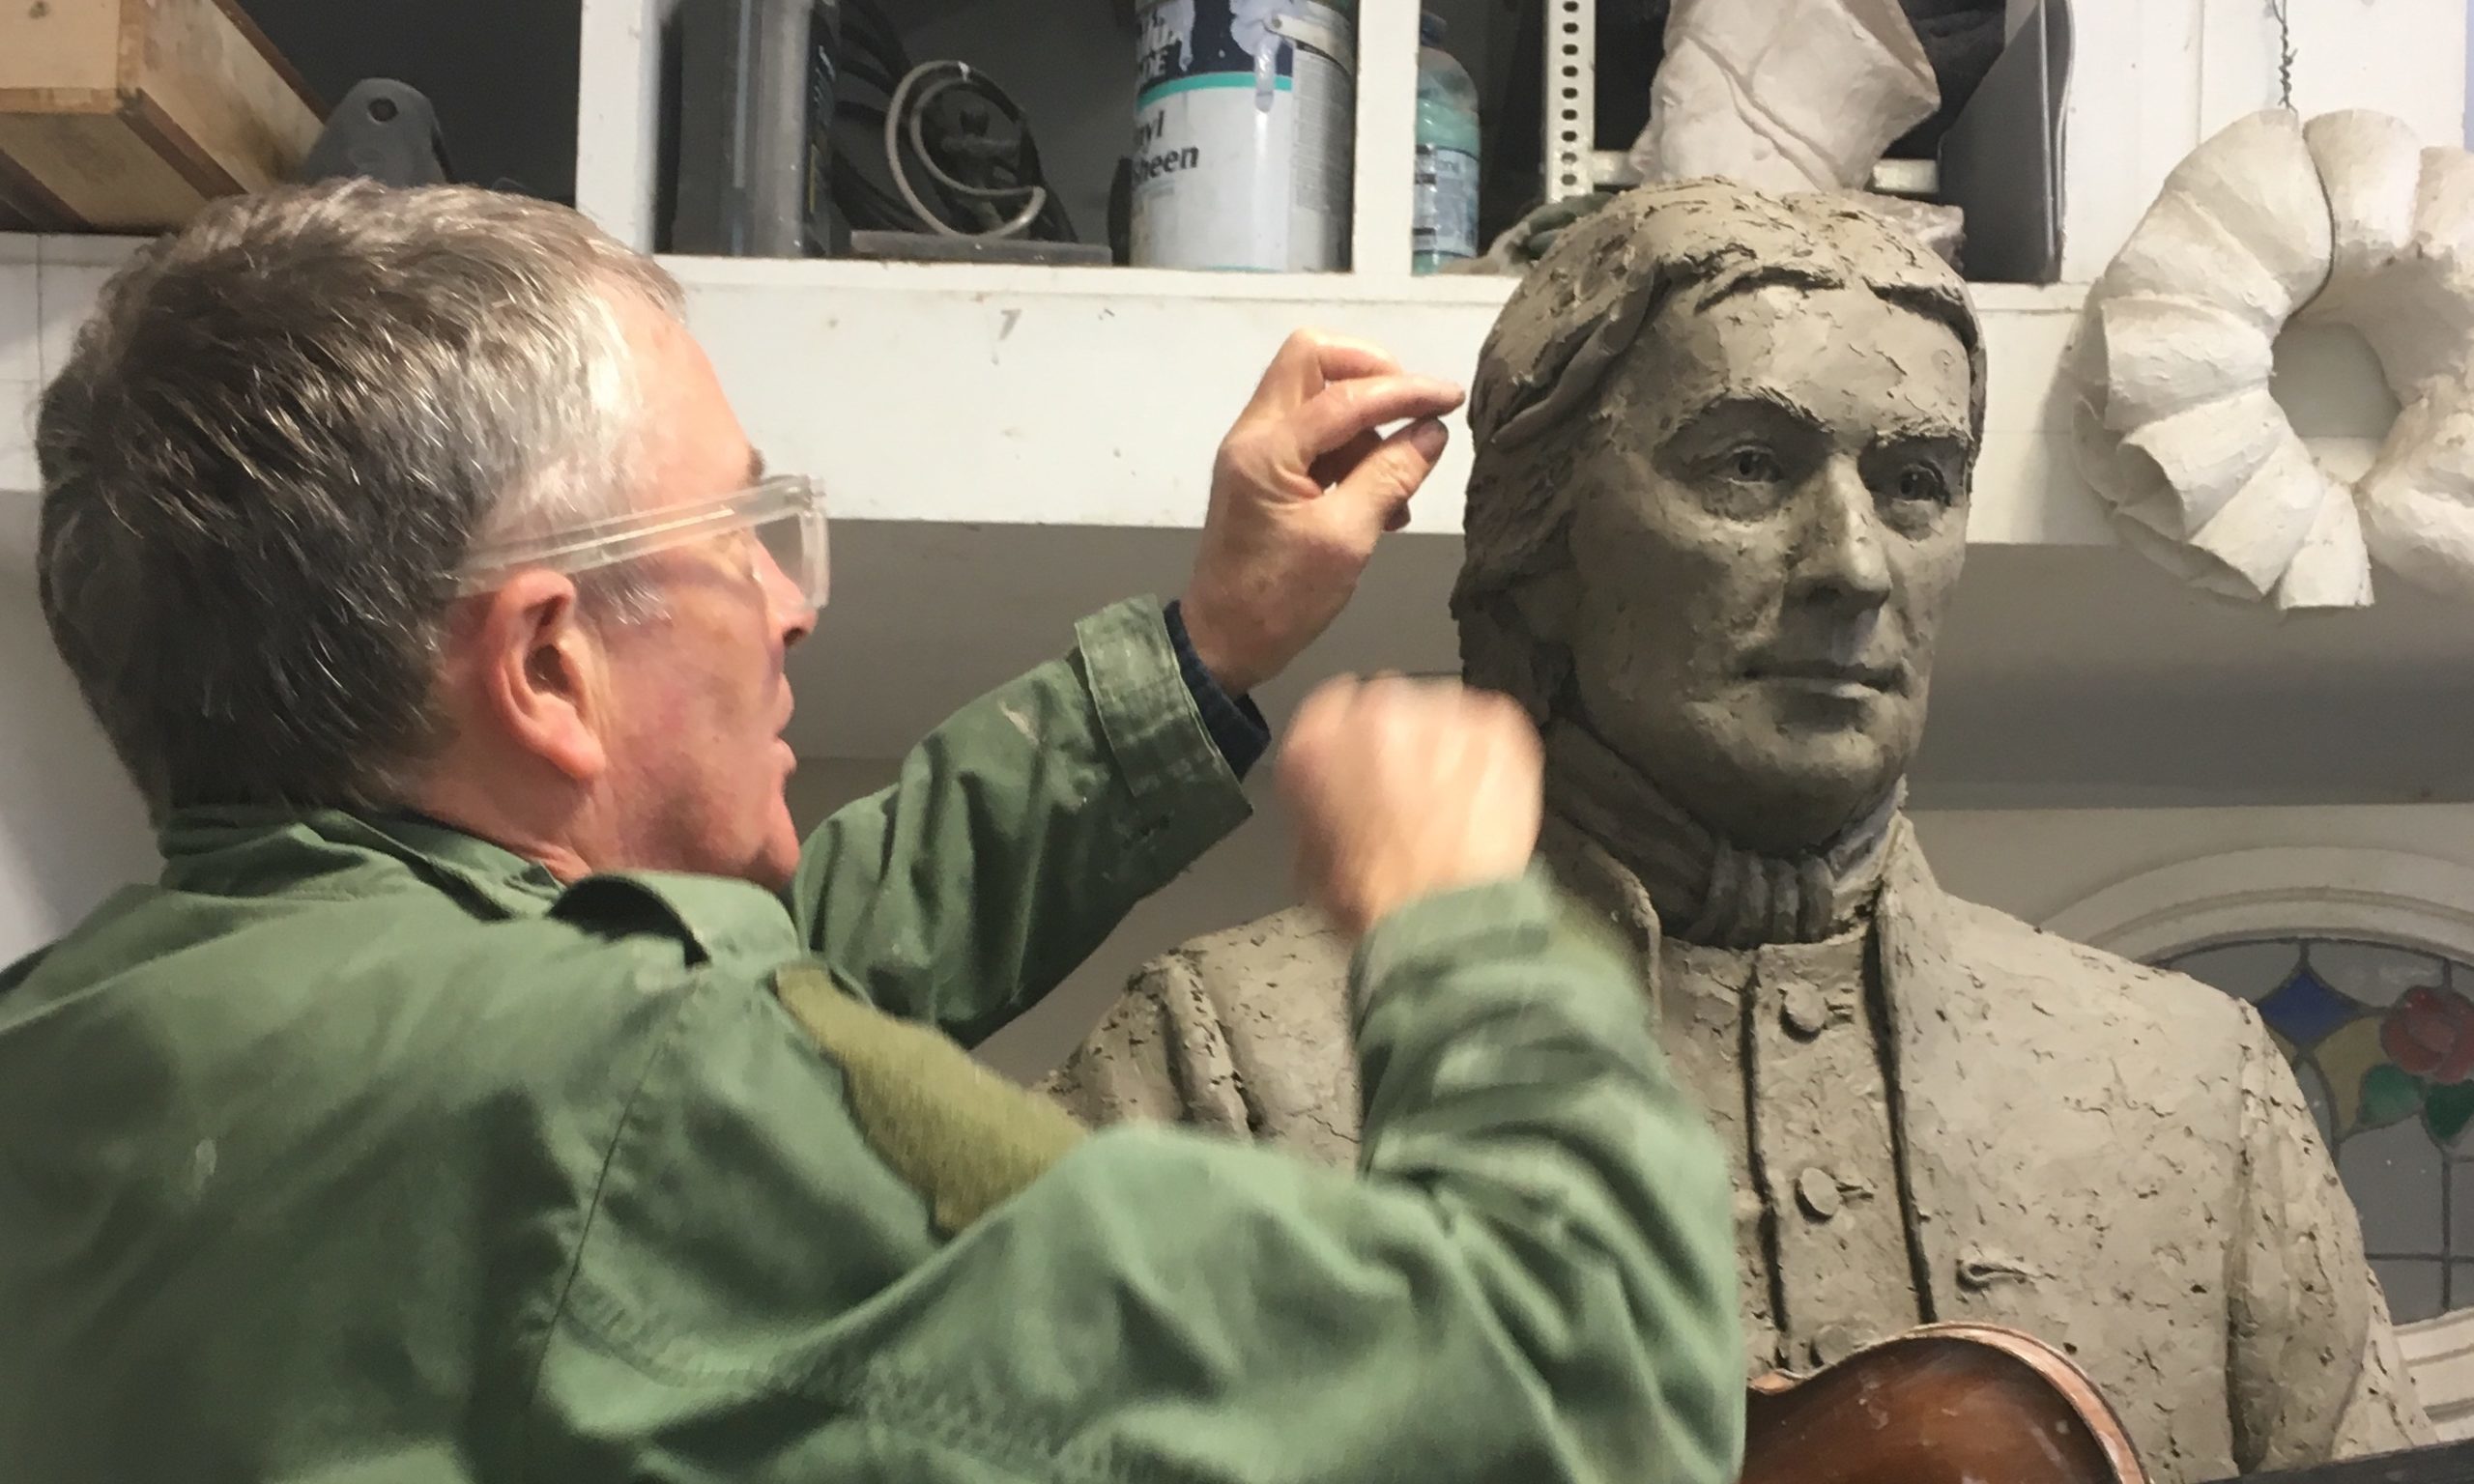 The Niel Gow memorial statue is nearing completion.